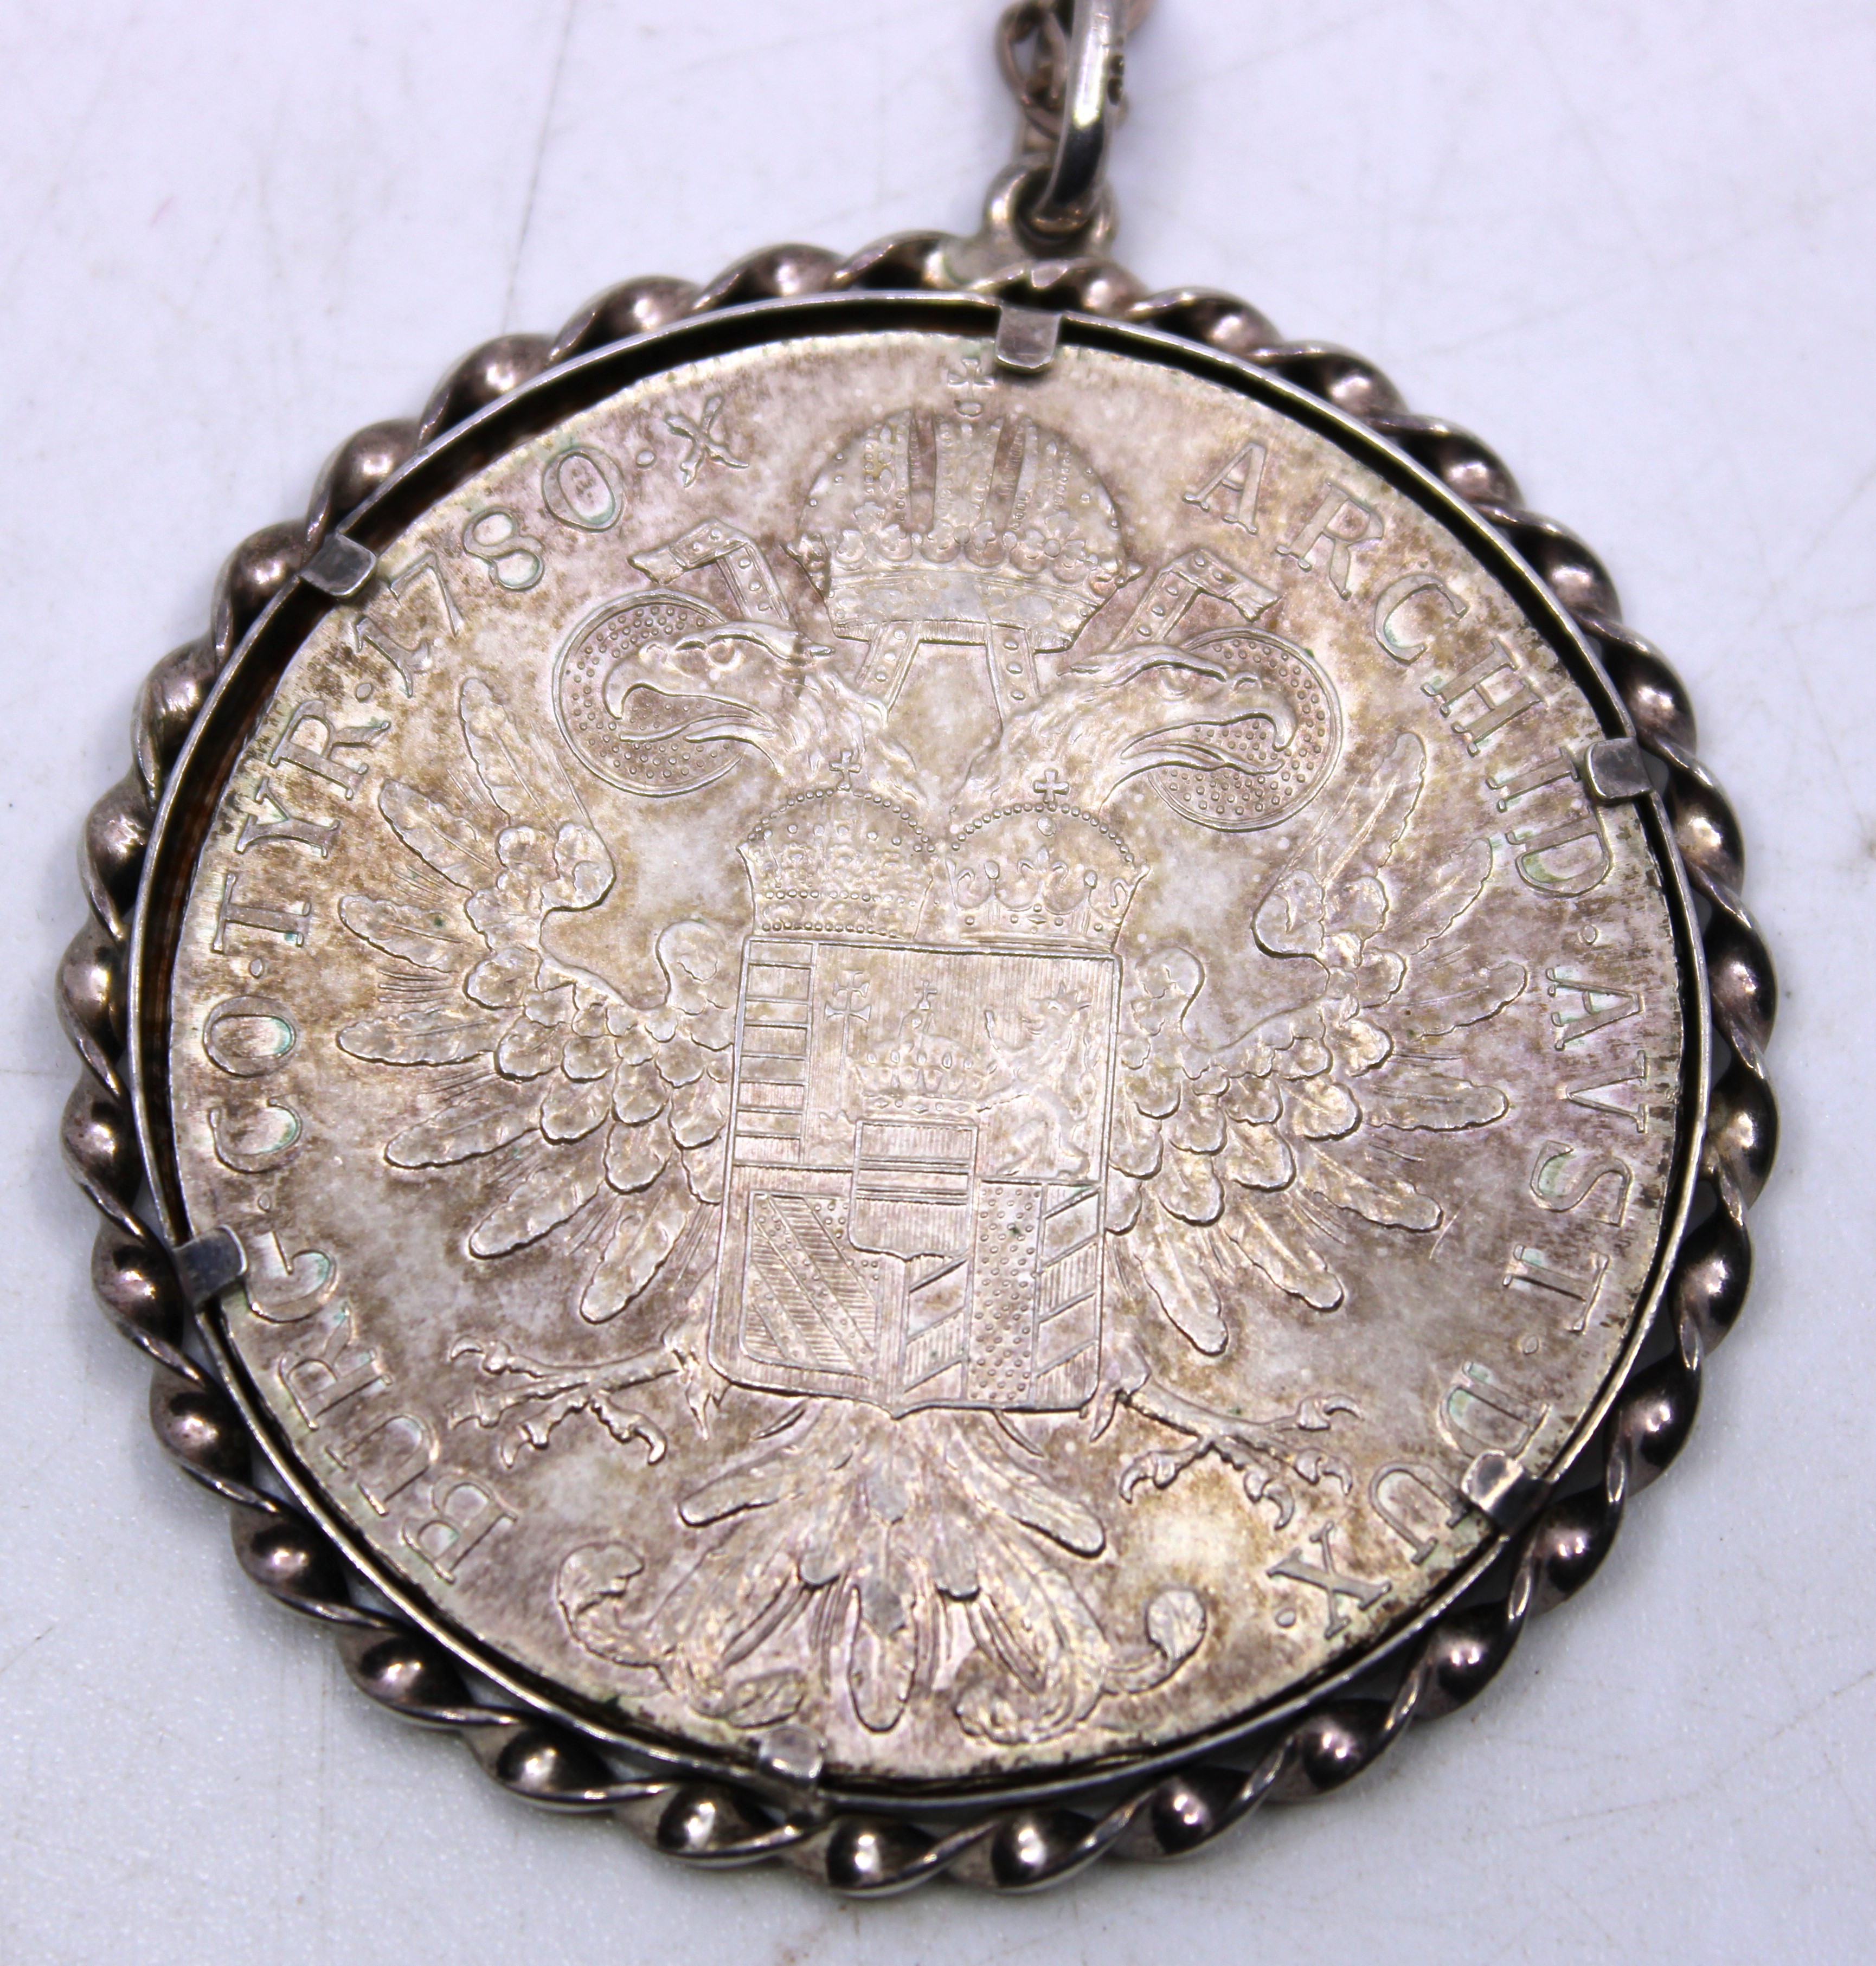 Maria Theresa 1780 Thaler Re-strike Coin Pendant on a Silver Chain.  An impressive size Coin Pendant - Image 3 of 3